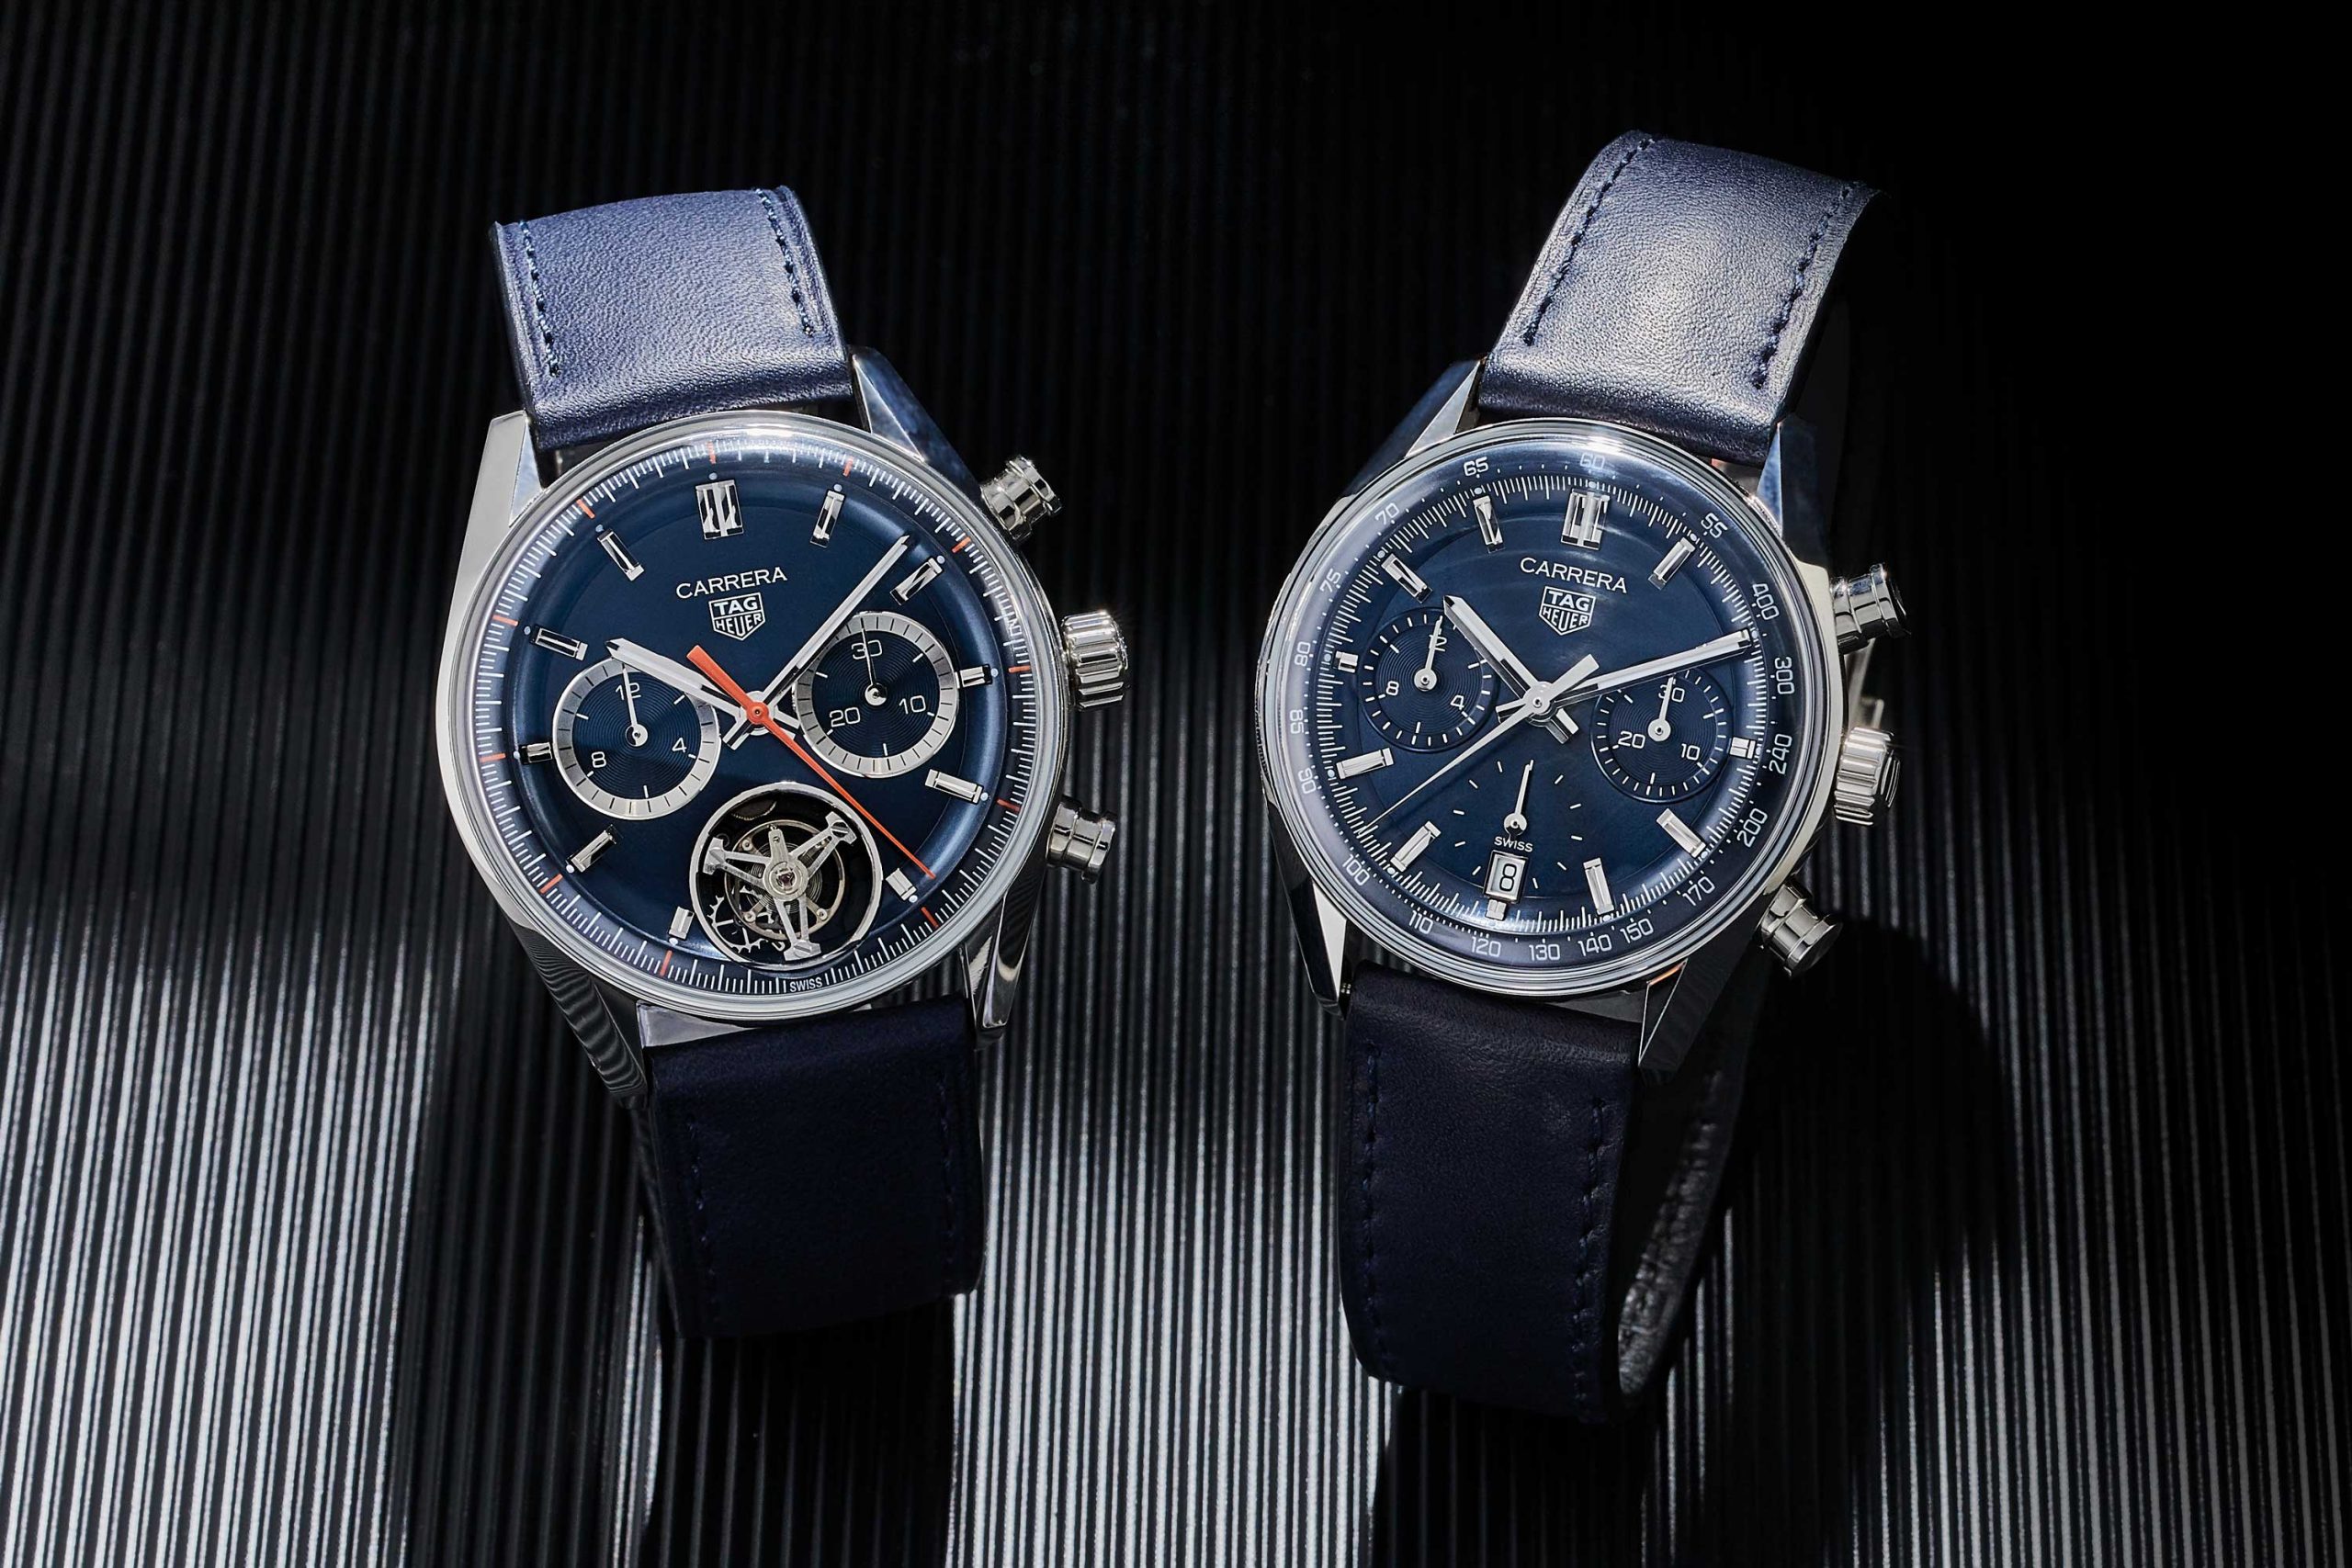 The new face of the TAG Heuer Carrera, in tourbillon and chronograph versions